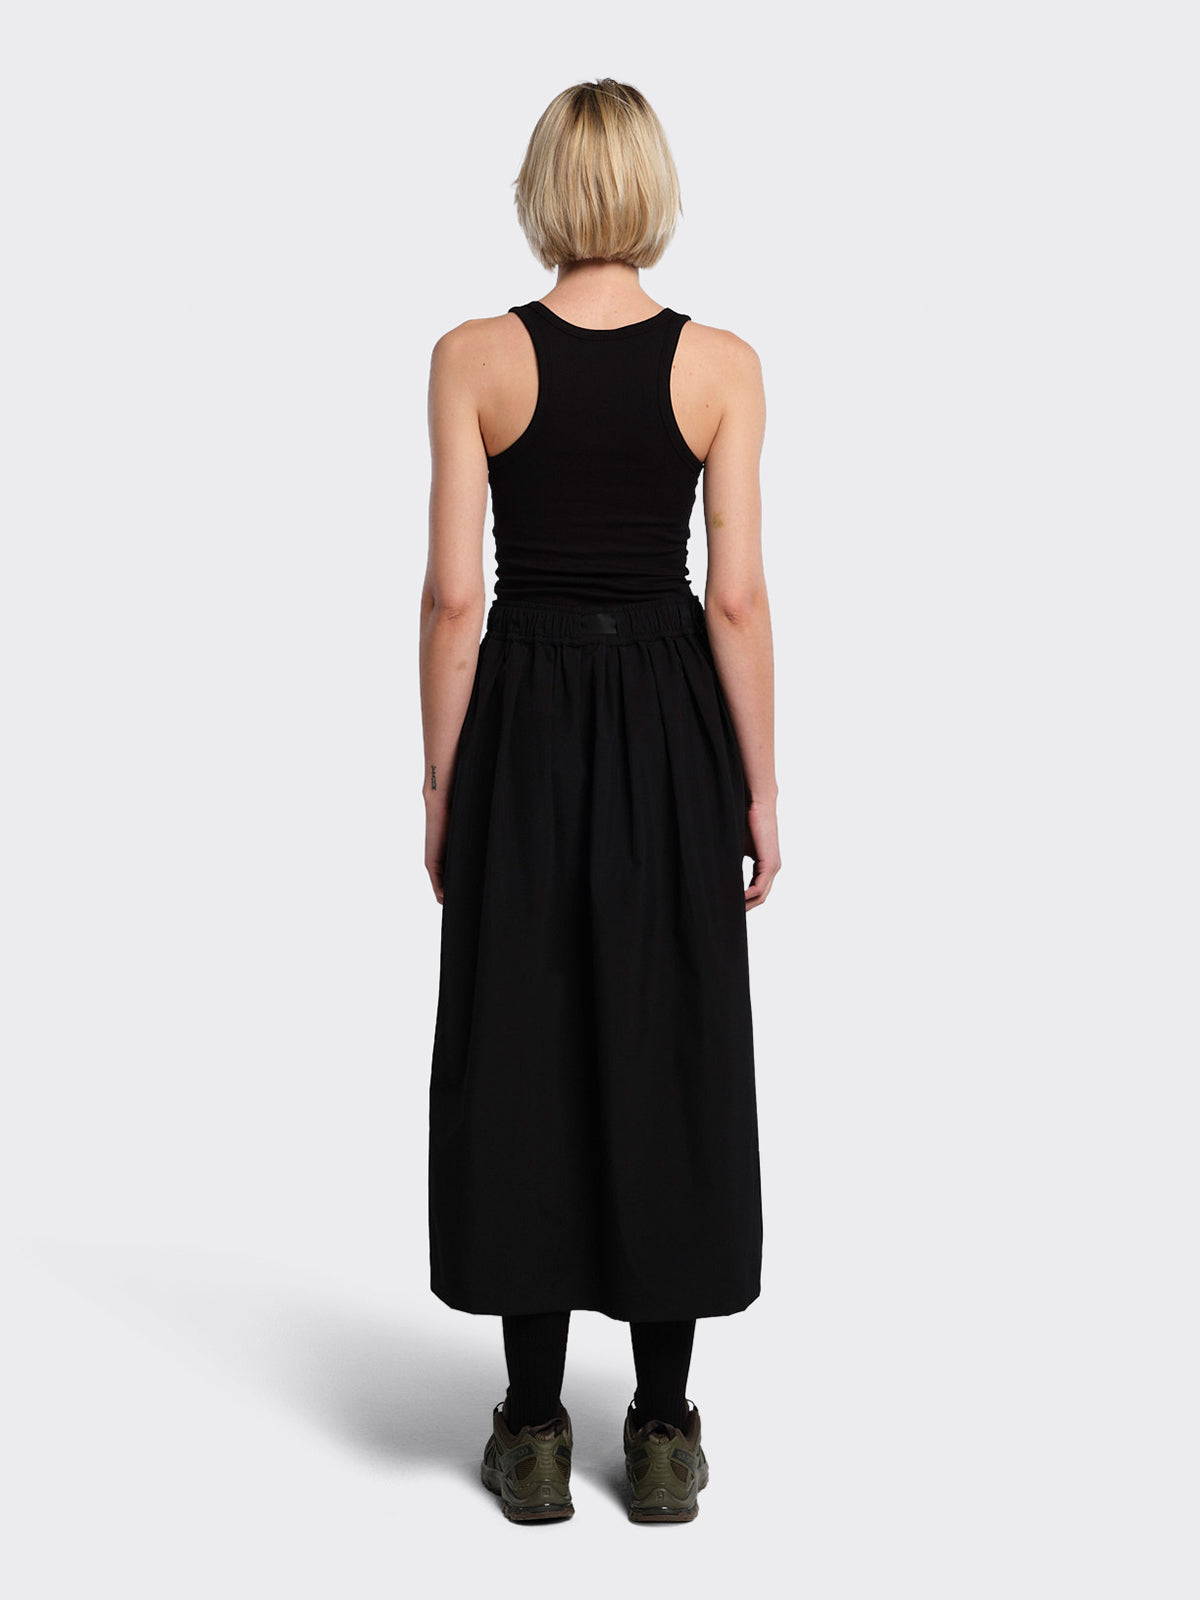 Woman wearing Hildre skirt from Blæst in Black